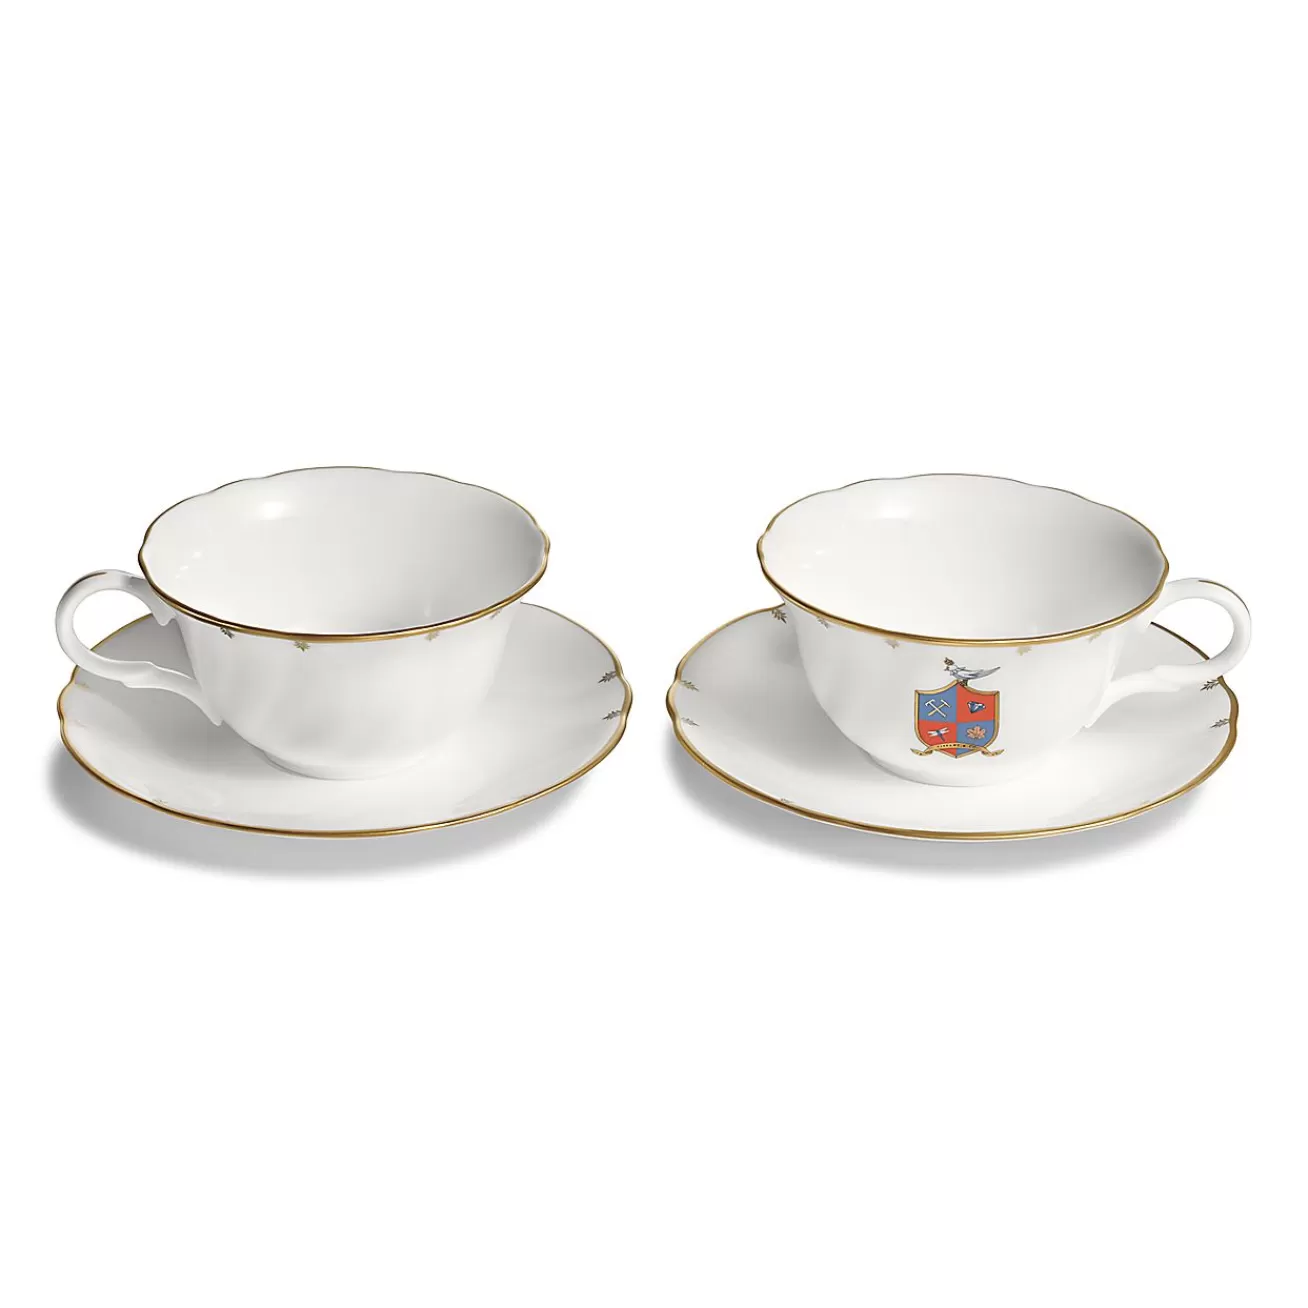 Tiffany & Co. Tiffany Crest Teacups Set of Two, in Bone China | ^ The Couple | Tableware